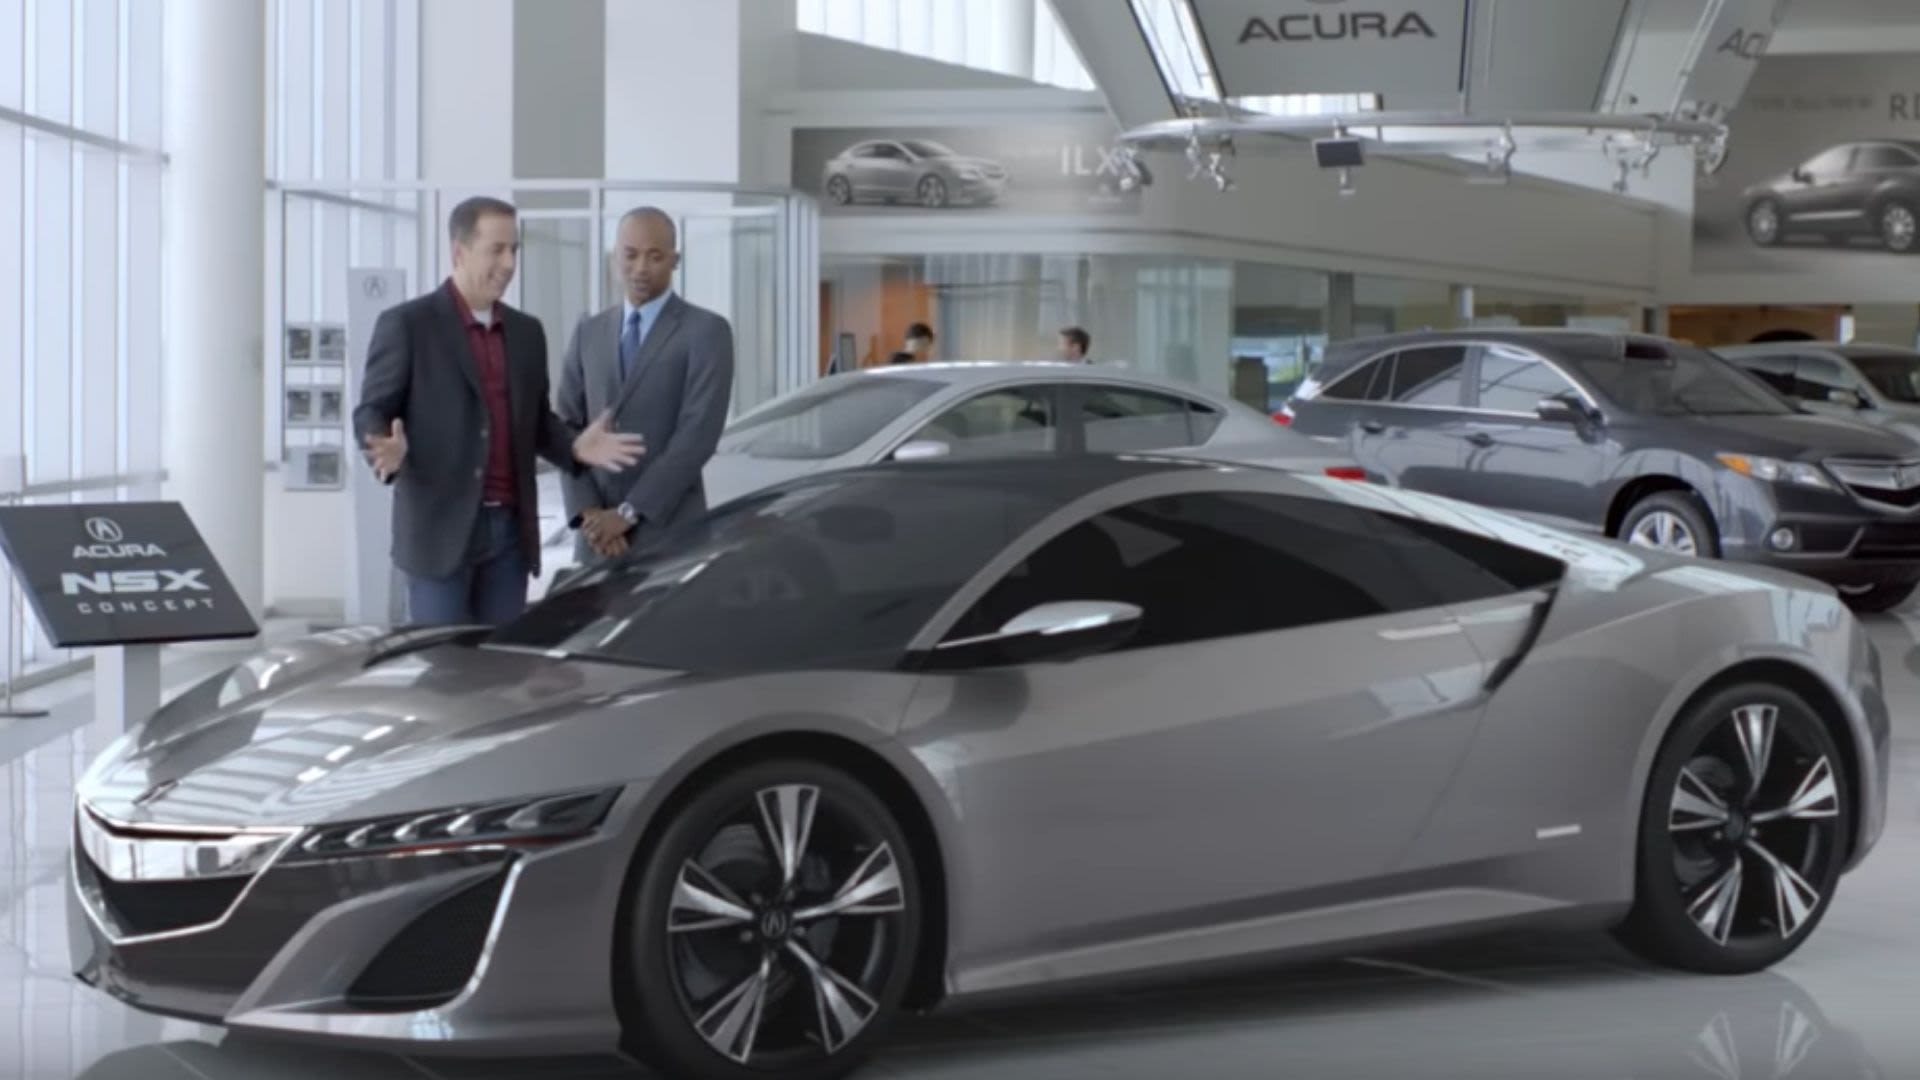 Jerry Seinfeld Won’t Ever Buy This Car Brand